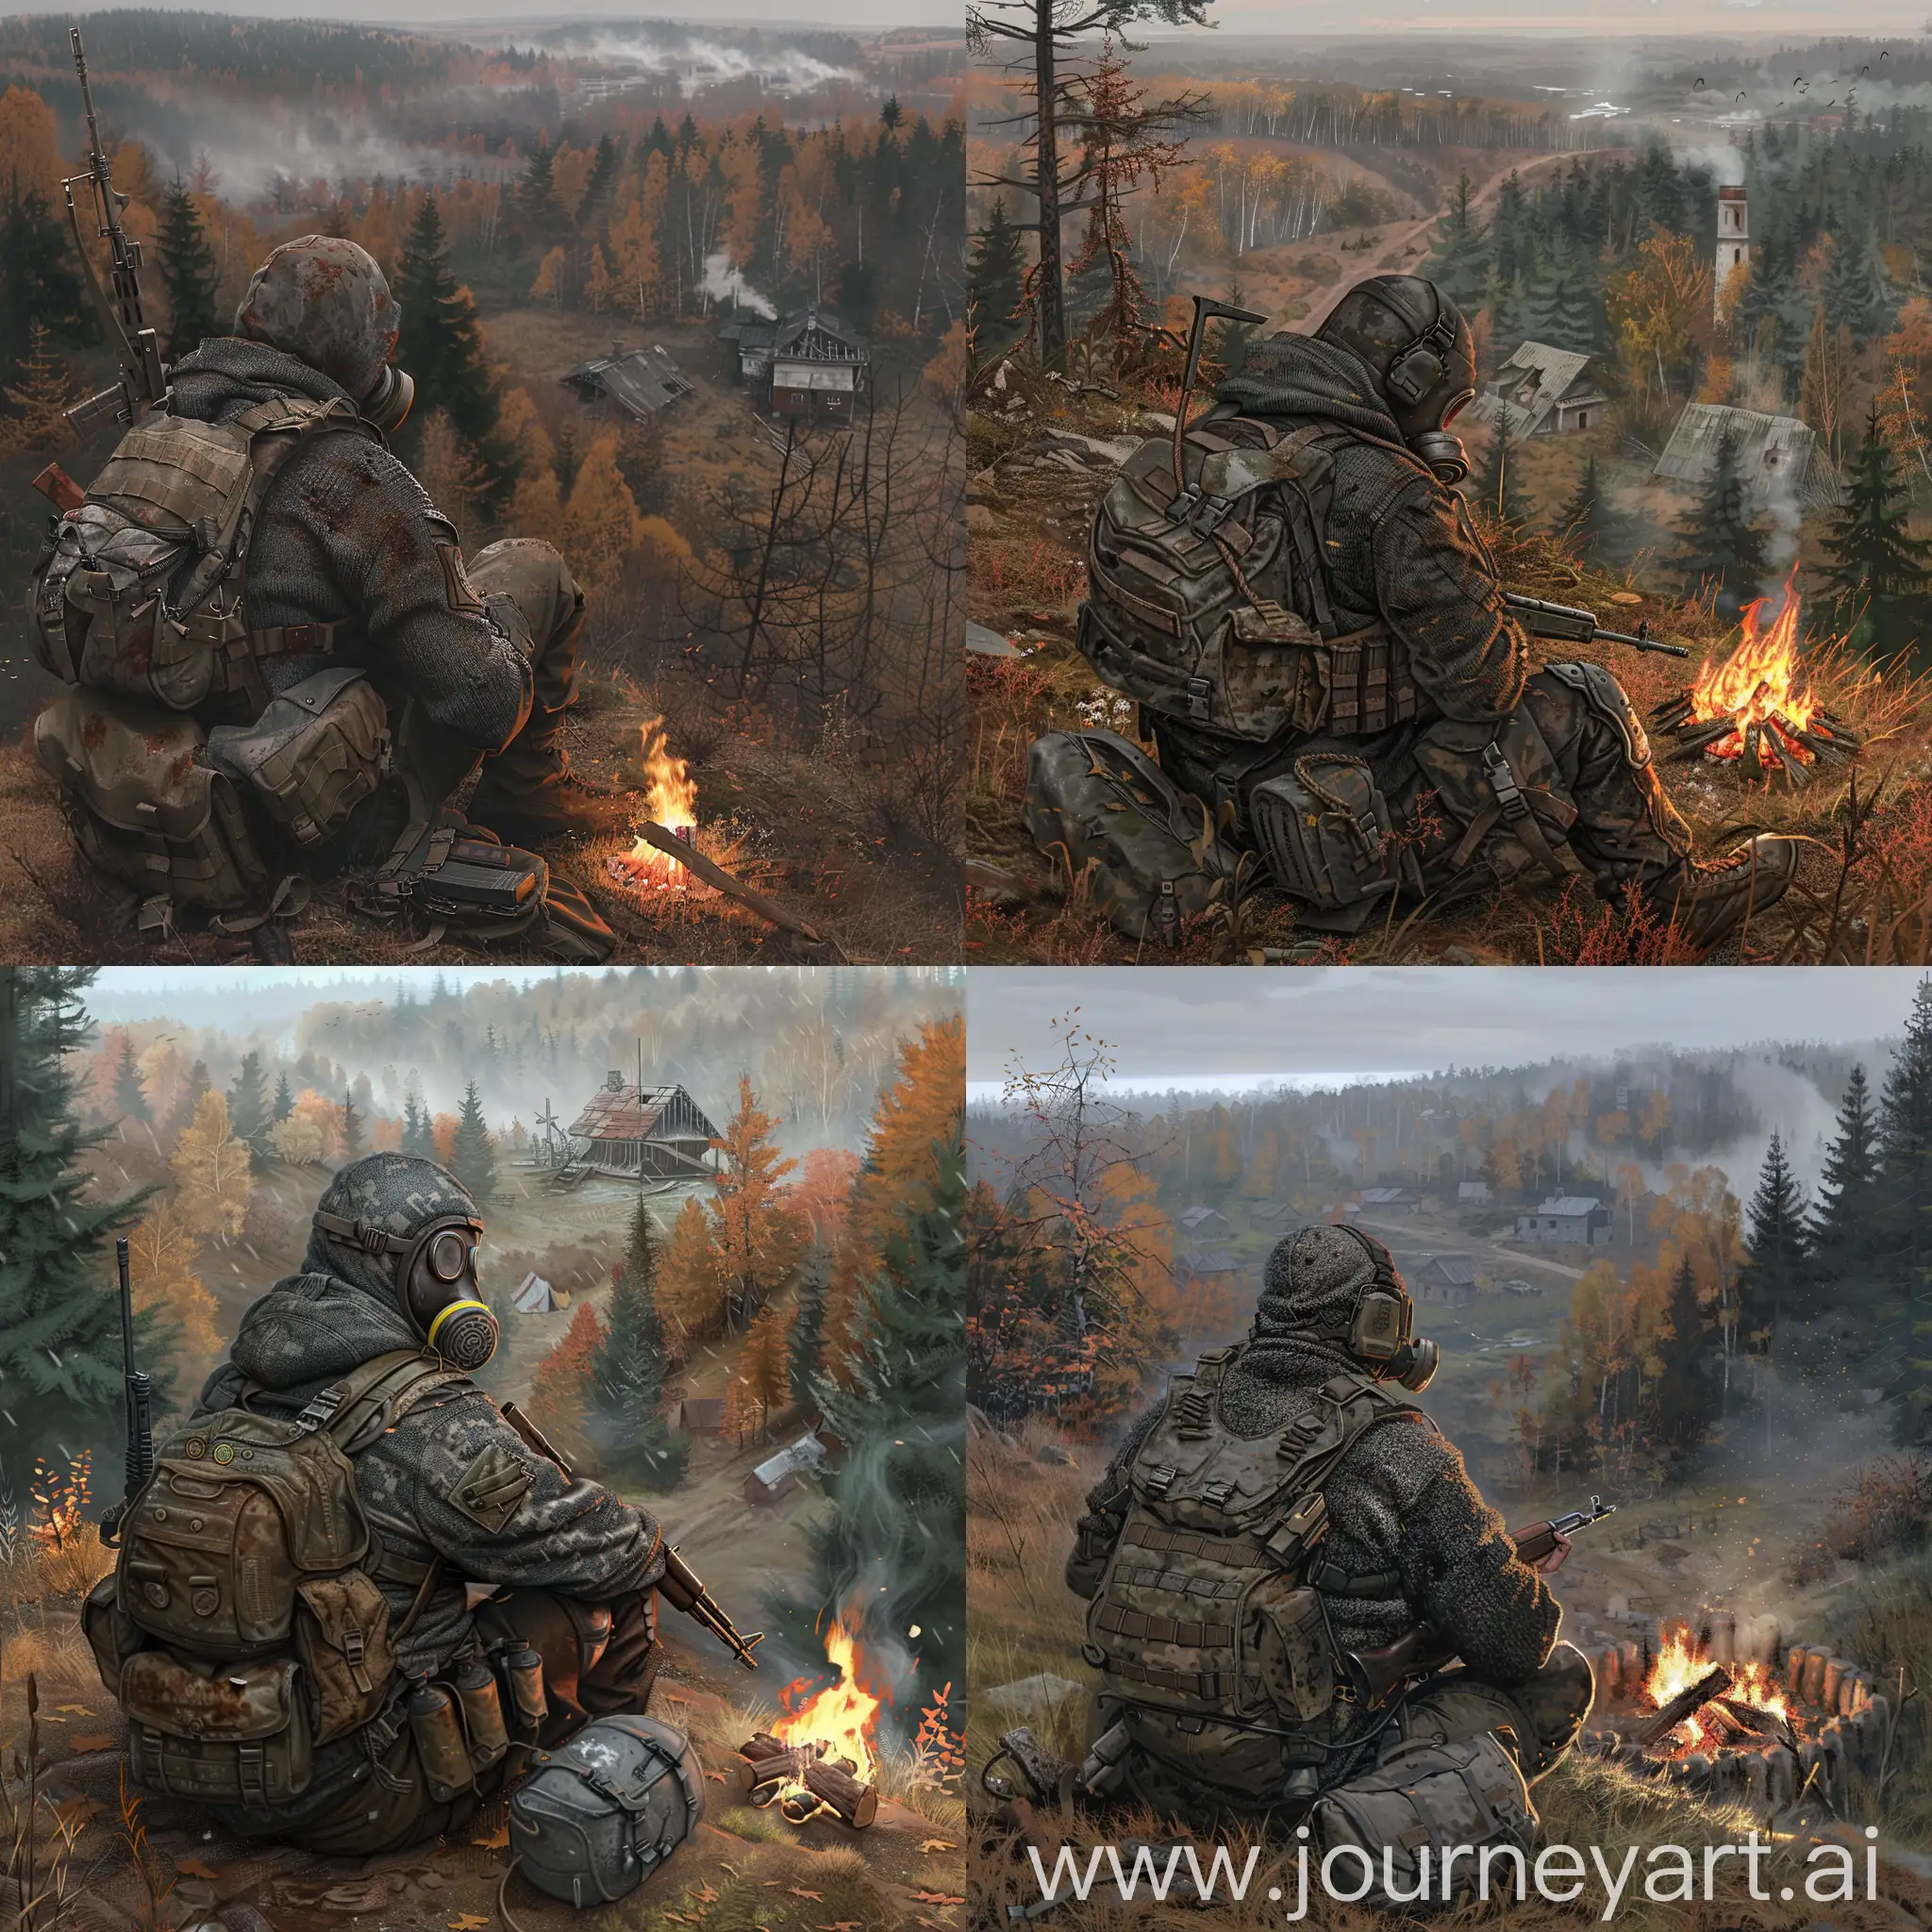 Stalker art, stalker are sitting on a hill by a campfire, stalker is wearing a Soviet dark gray dirty sweater, military unloading is worn over the sweater, over the sweater is a dirty brown jacket with military unloading and armor, a gasmask on his face, he has a rifle in his hands, a small gray backpack on his back, the weather is gloomy autumn, from the hill, where the stalker are sitting, there is a view of the forest and an abandoned Soviet village standing in the distance.